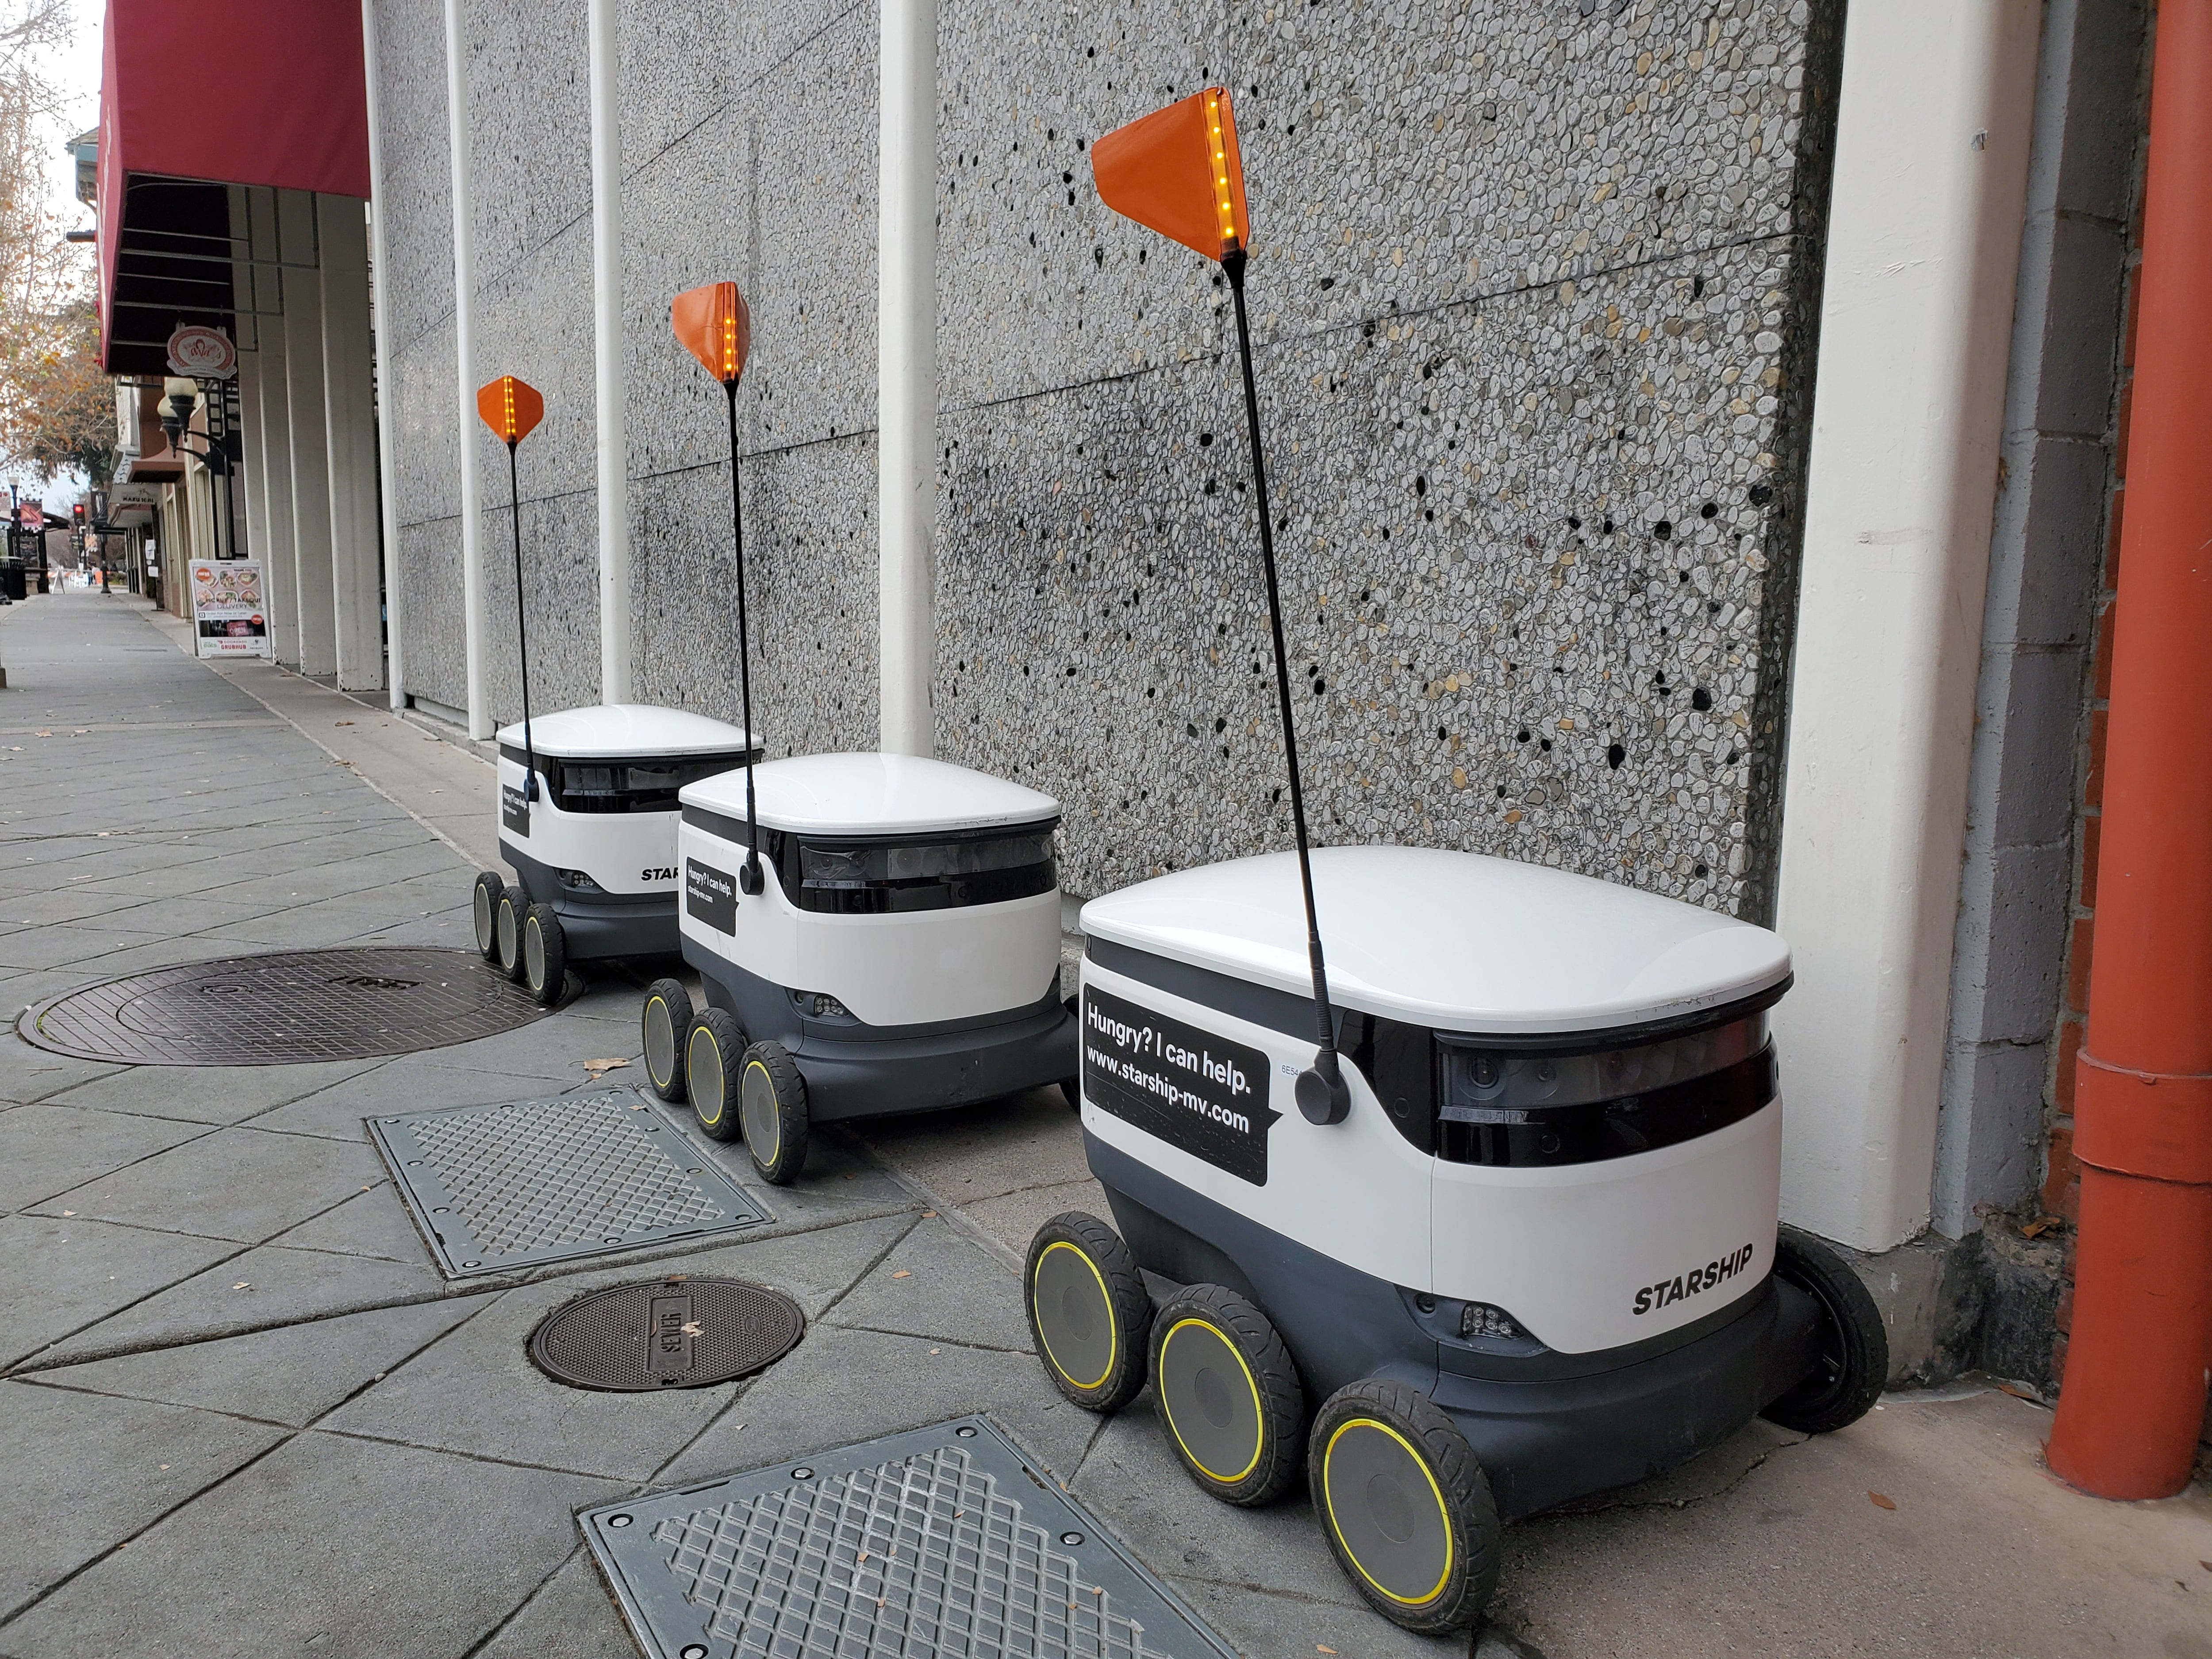 Starship self-driving delivery robots